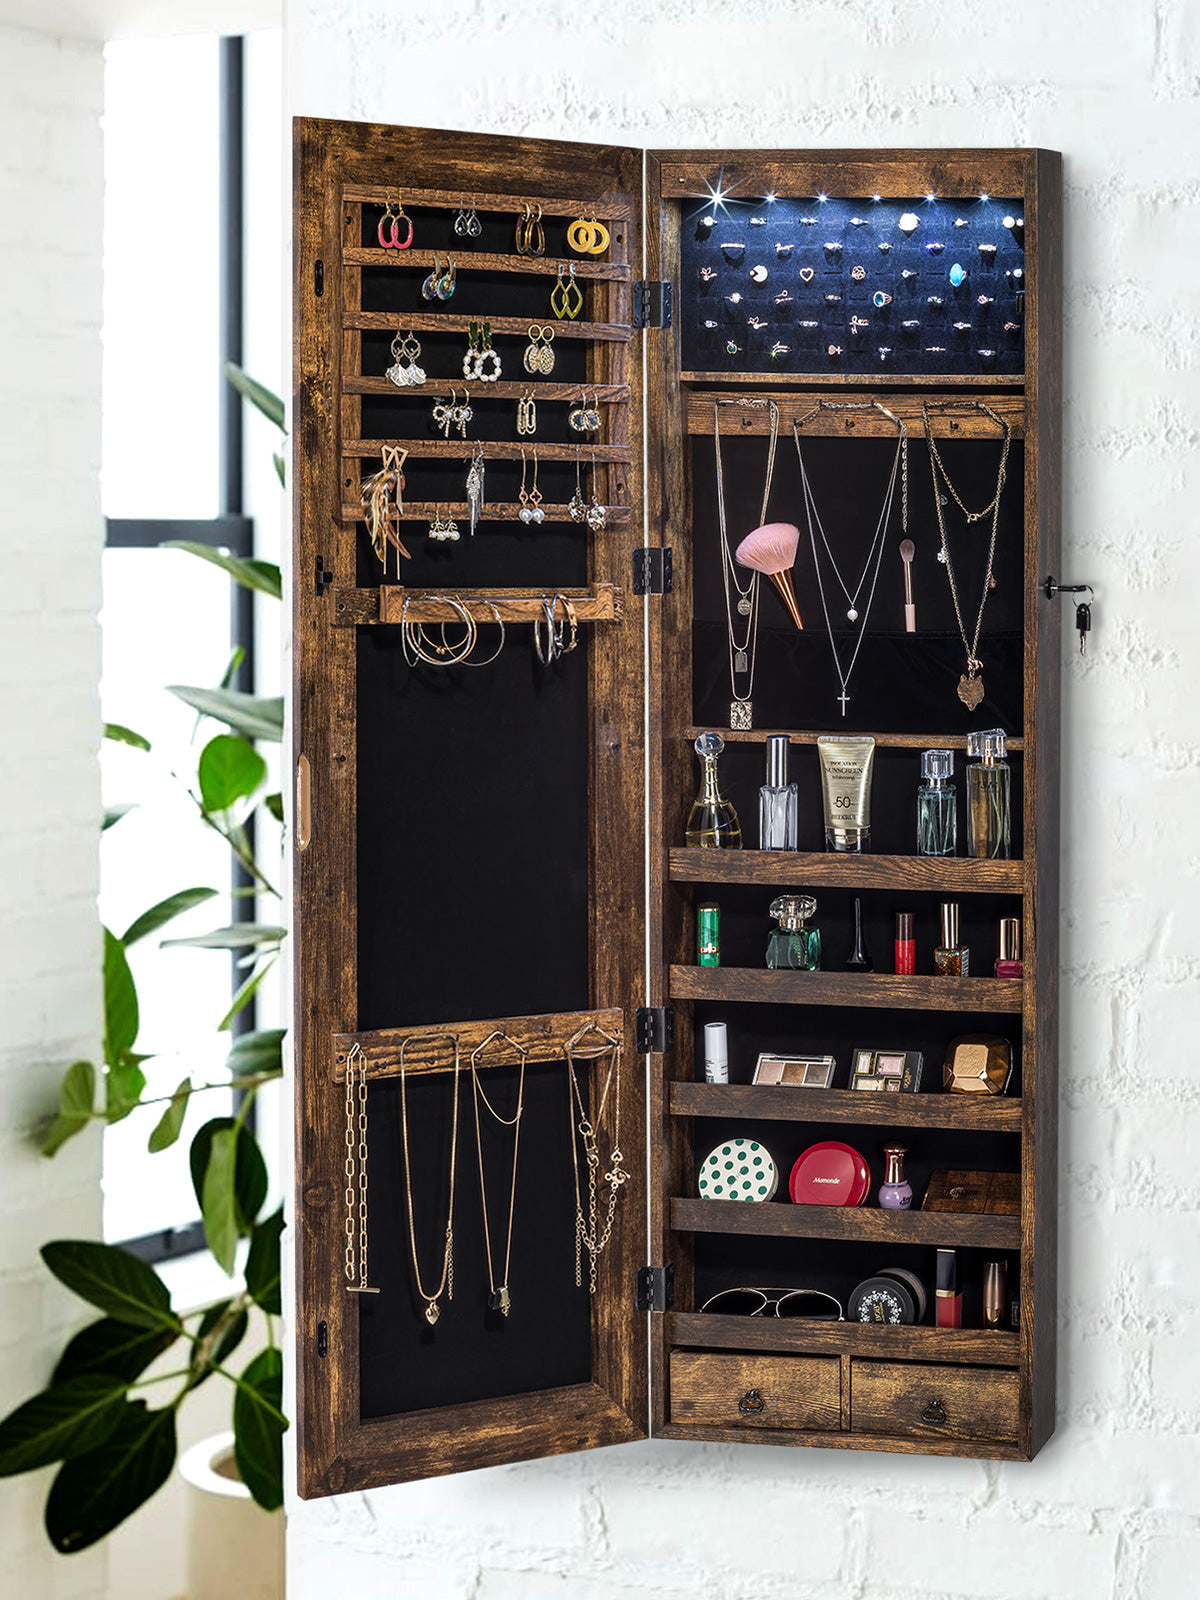 Luxfurni | Jewelry Armoire | Wall Mounted Dahlia Jewelry Armoire with Built-in LED Light - Vintage